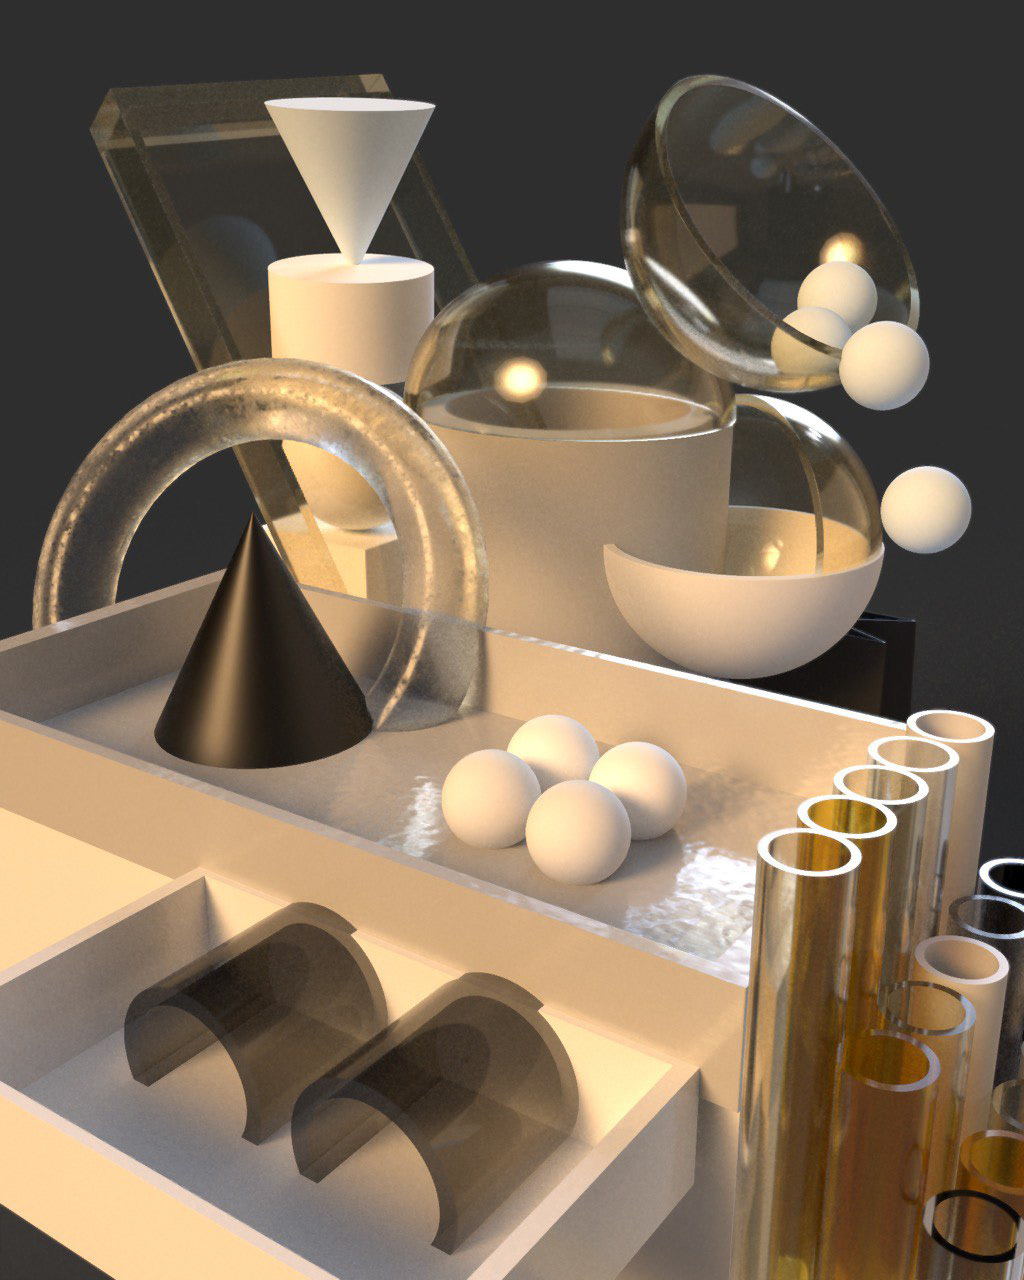 3dart playhouse holographic reflection light 3D architecture composition objects 3drender